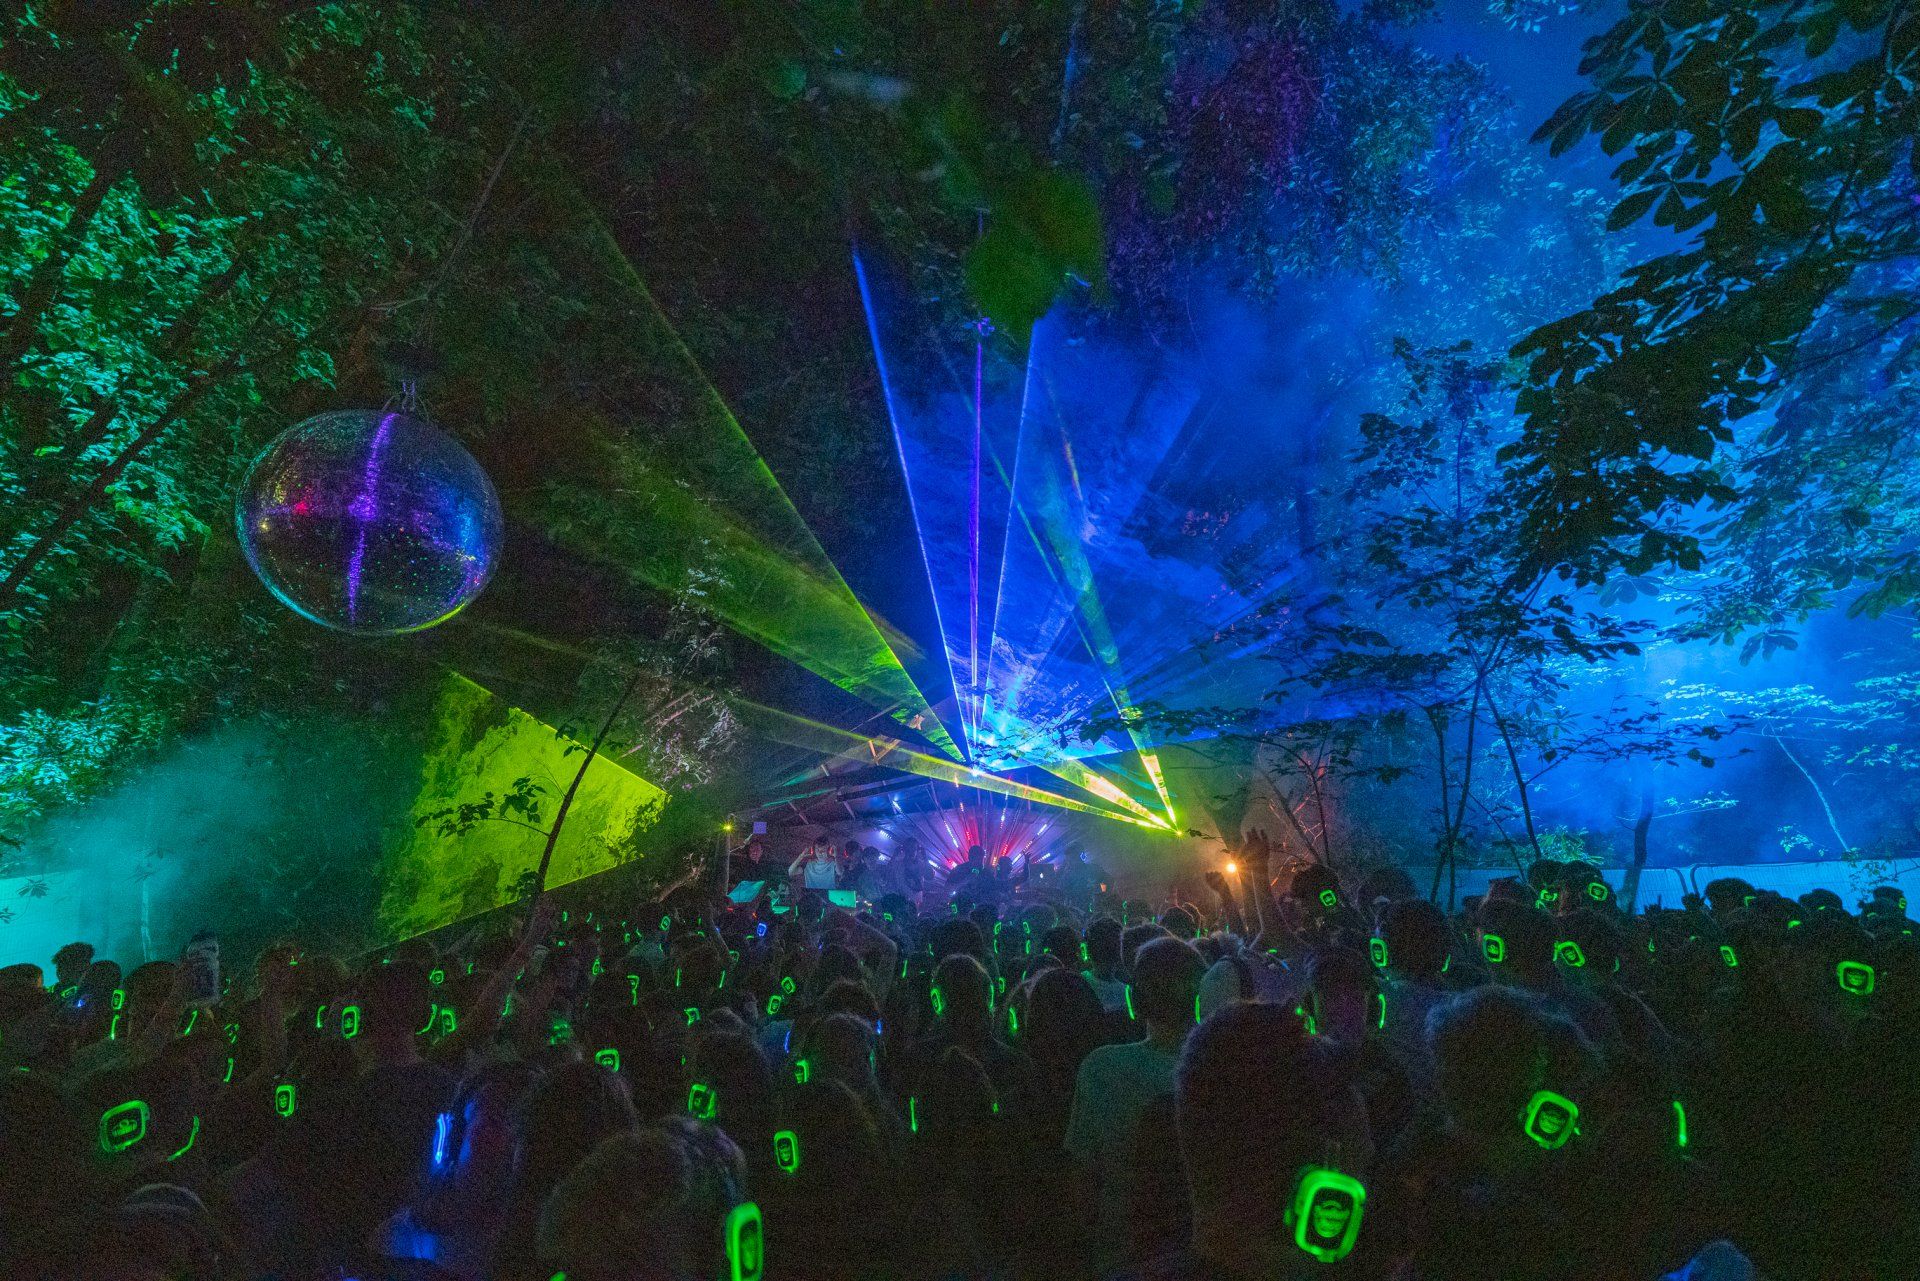 The Silent Disco At The Great Estate 2019